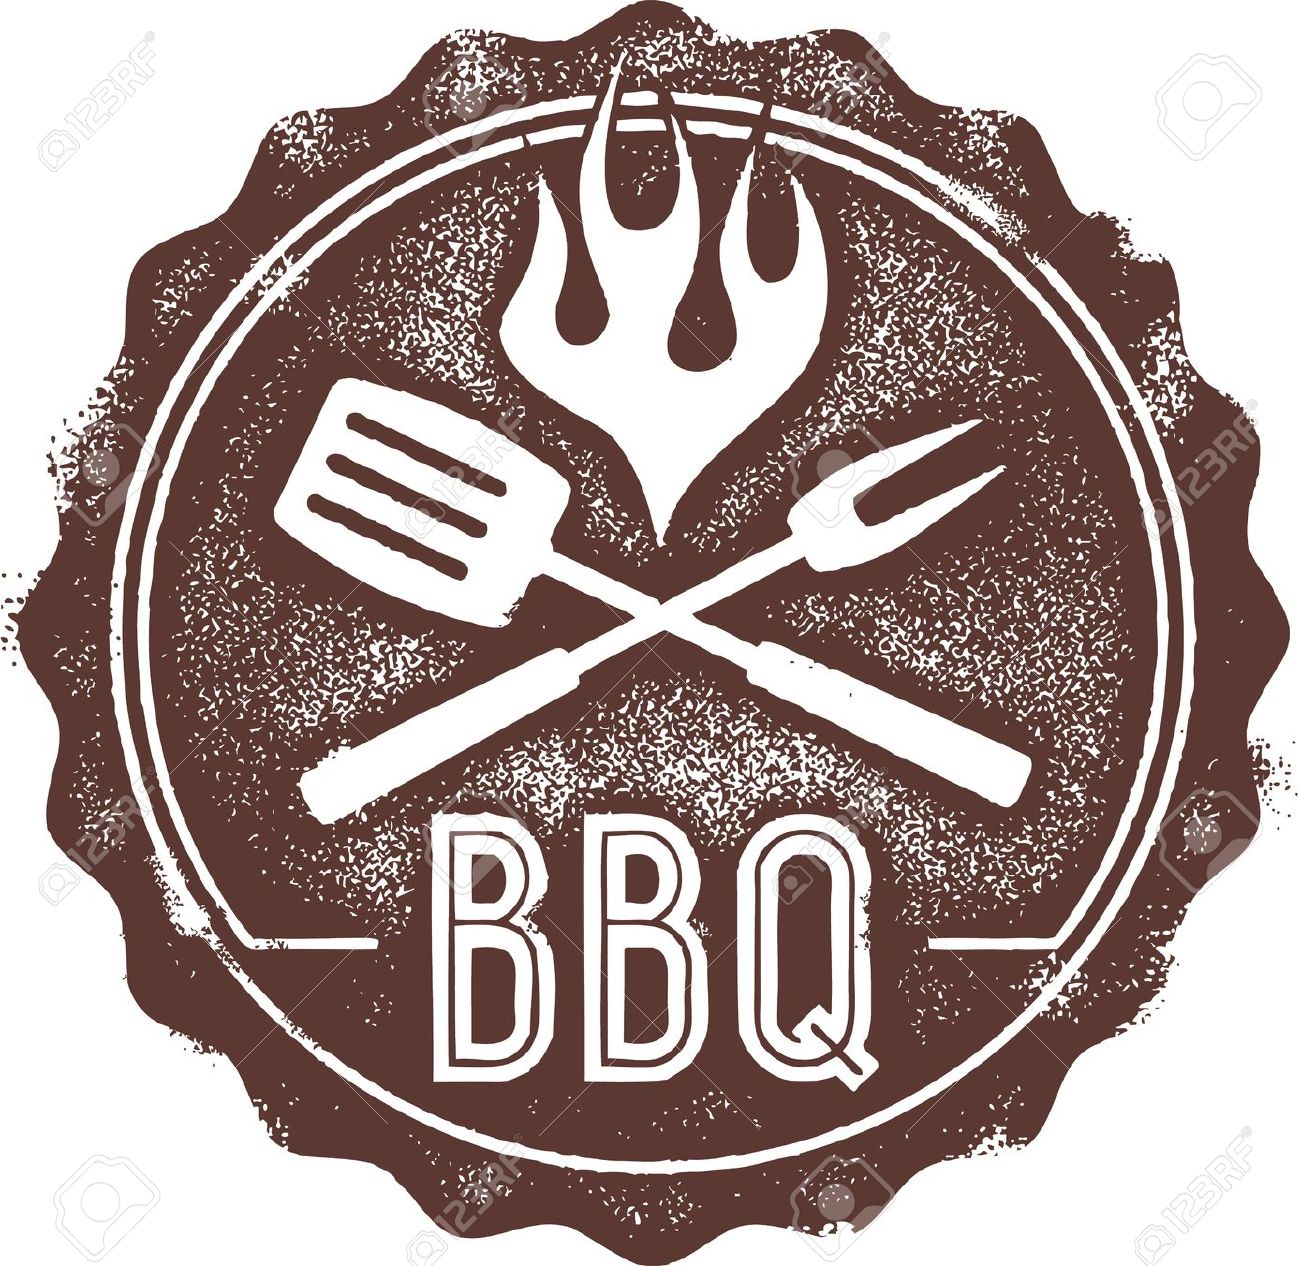 family barbecue clipart - photo #40